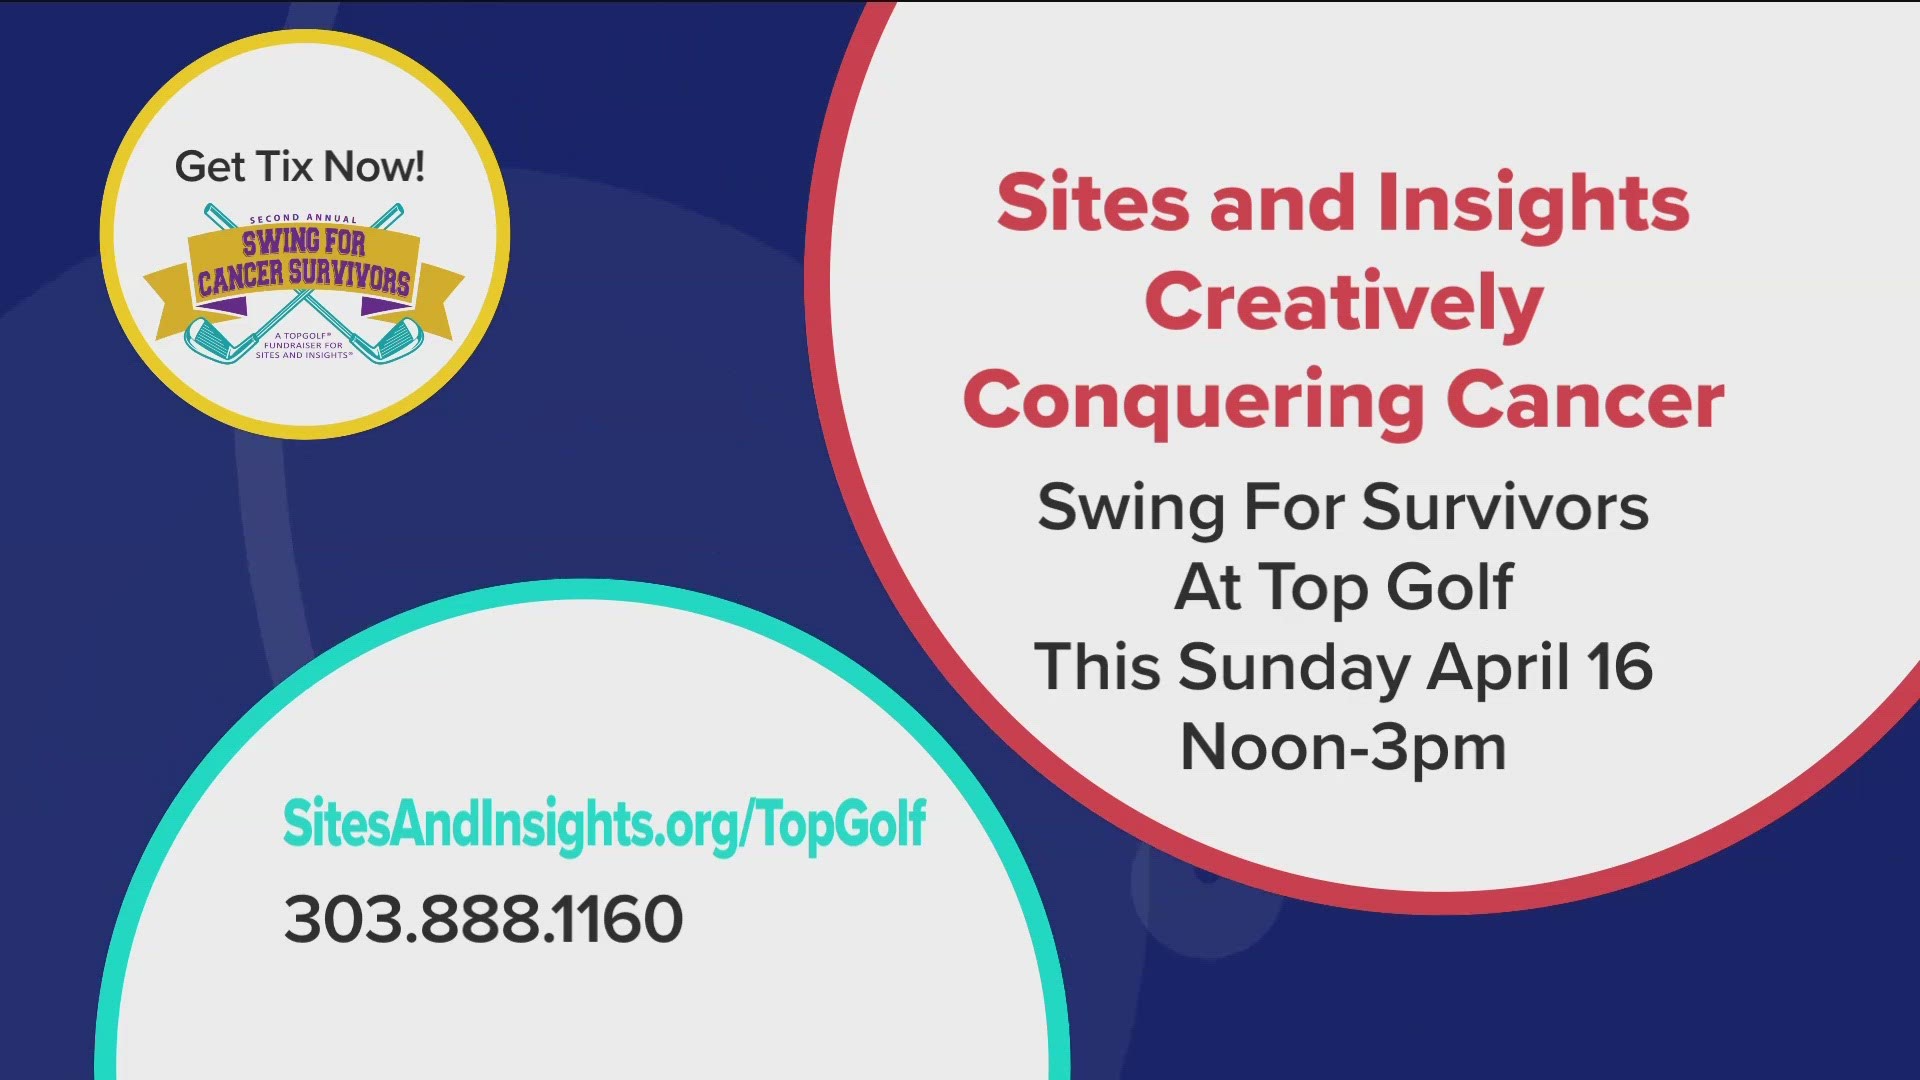 Take a few swings and support Sites and Insights at their Top Golf Fundraiser this Sunday from noon to 3PM. Register now at SitesAndInsights.org/TopGolf.